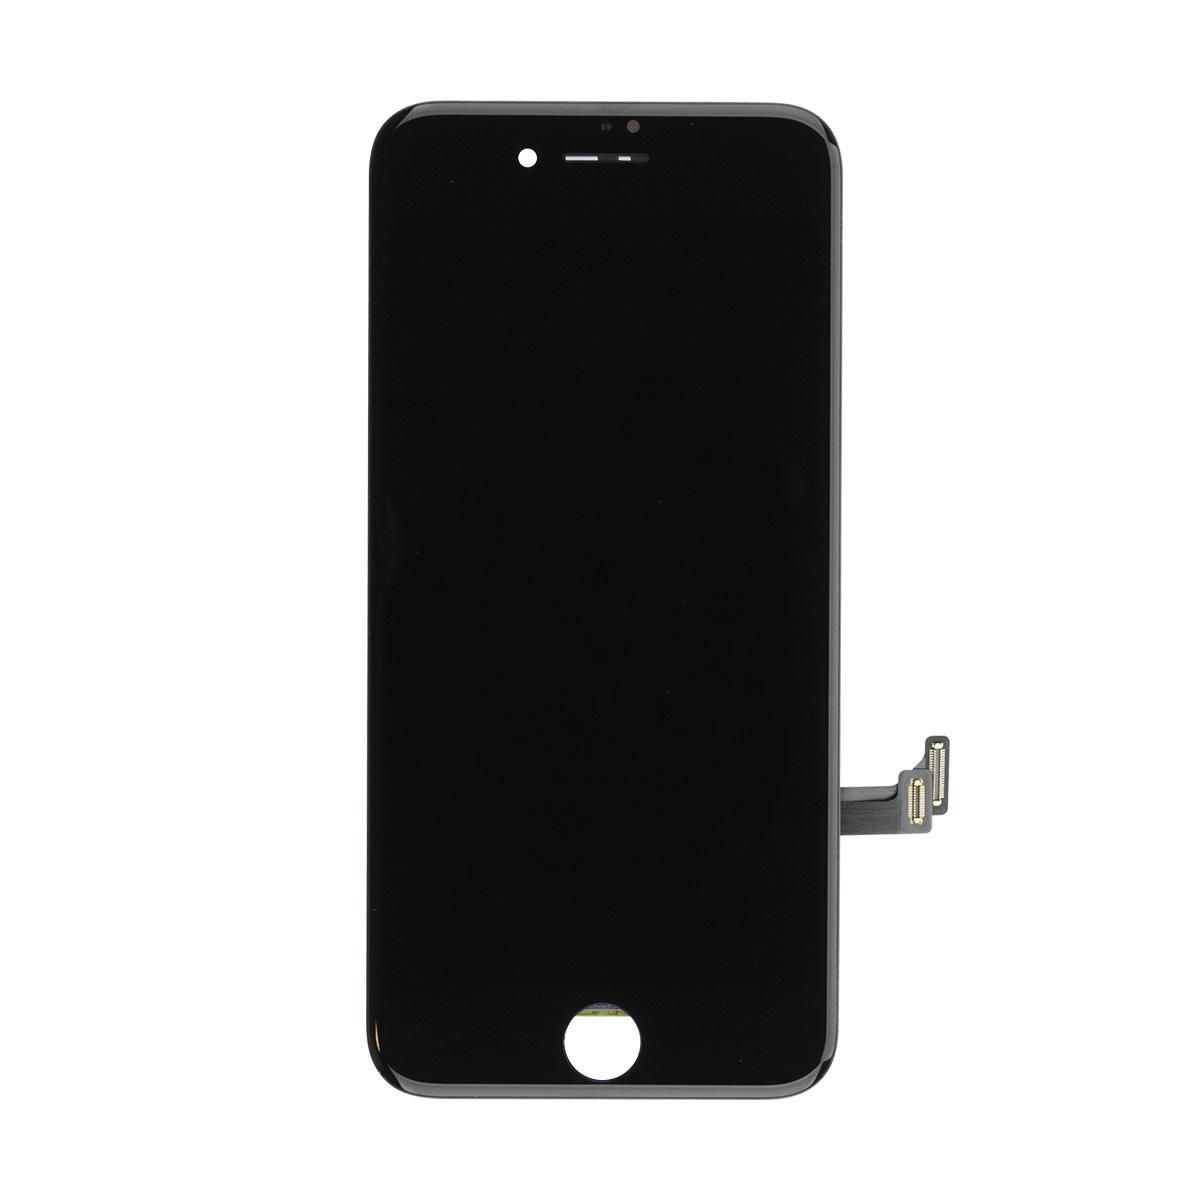 MOBX-IPOSE2020-LCD-B COREPARTS LCD Screen for iPhone SE 2020